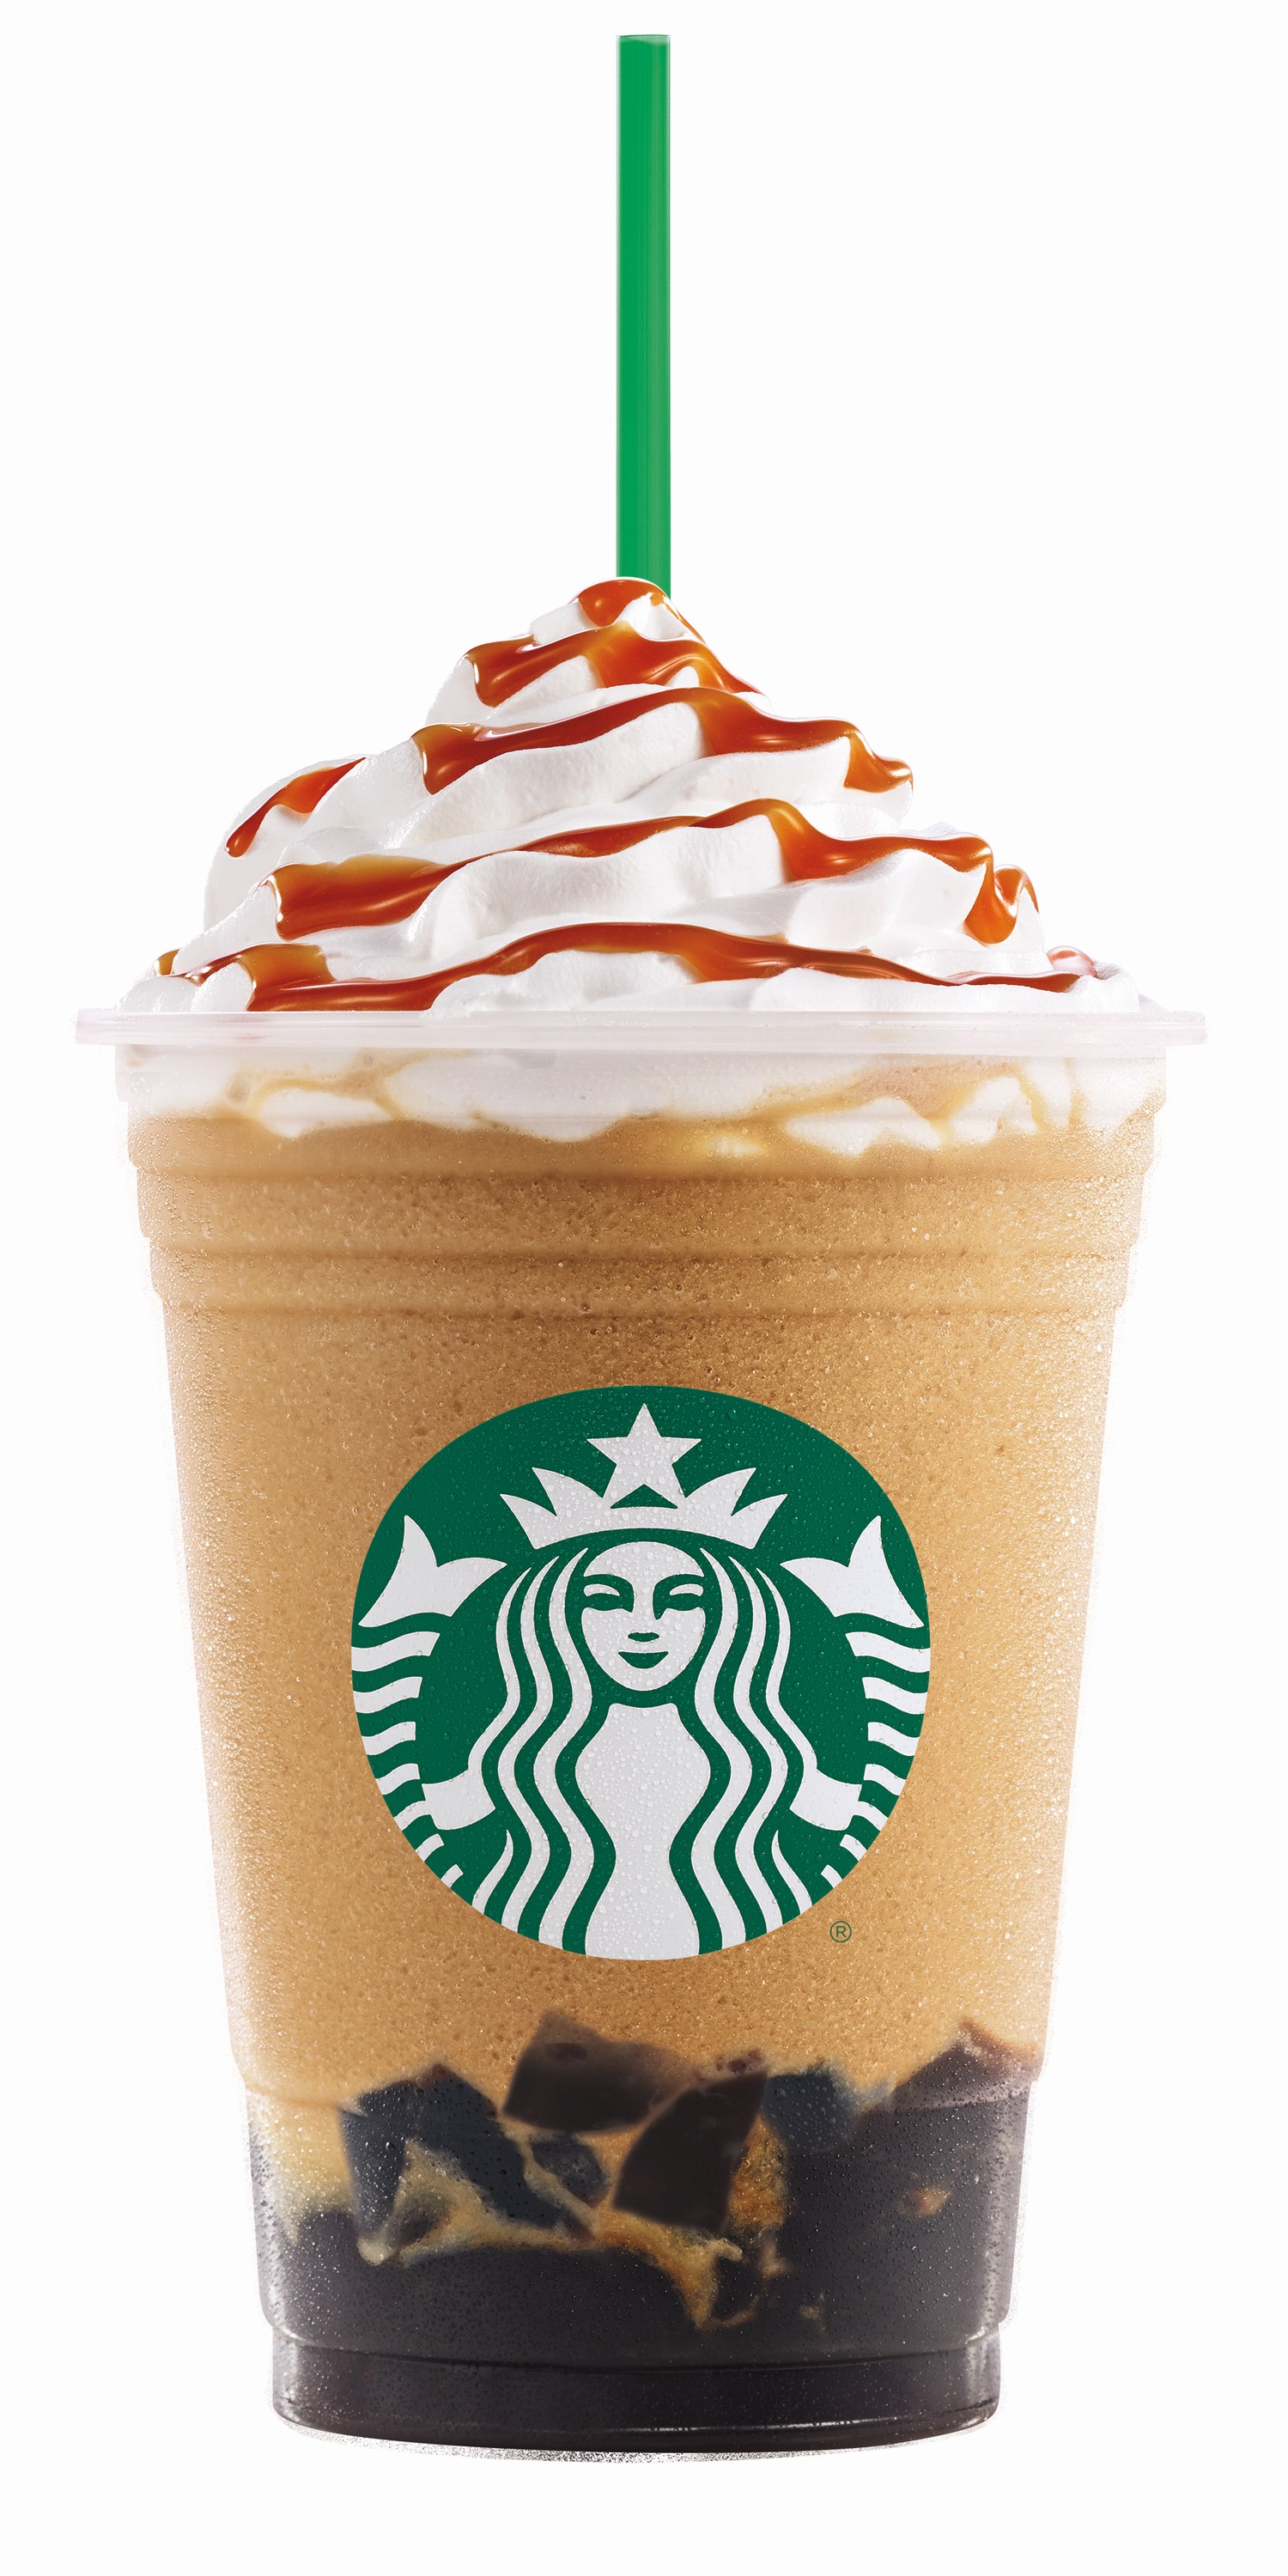 STARBUCKS INTRODUCES UNIQUE FRAPPUCCINO NEWS! | Best Communications